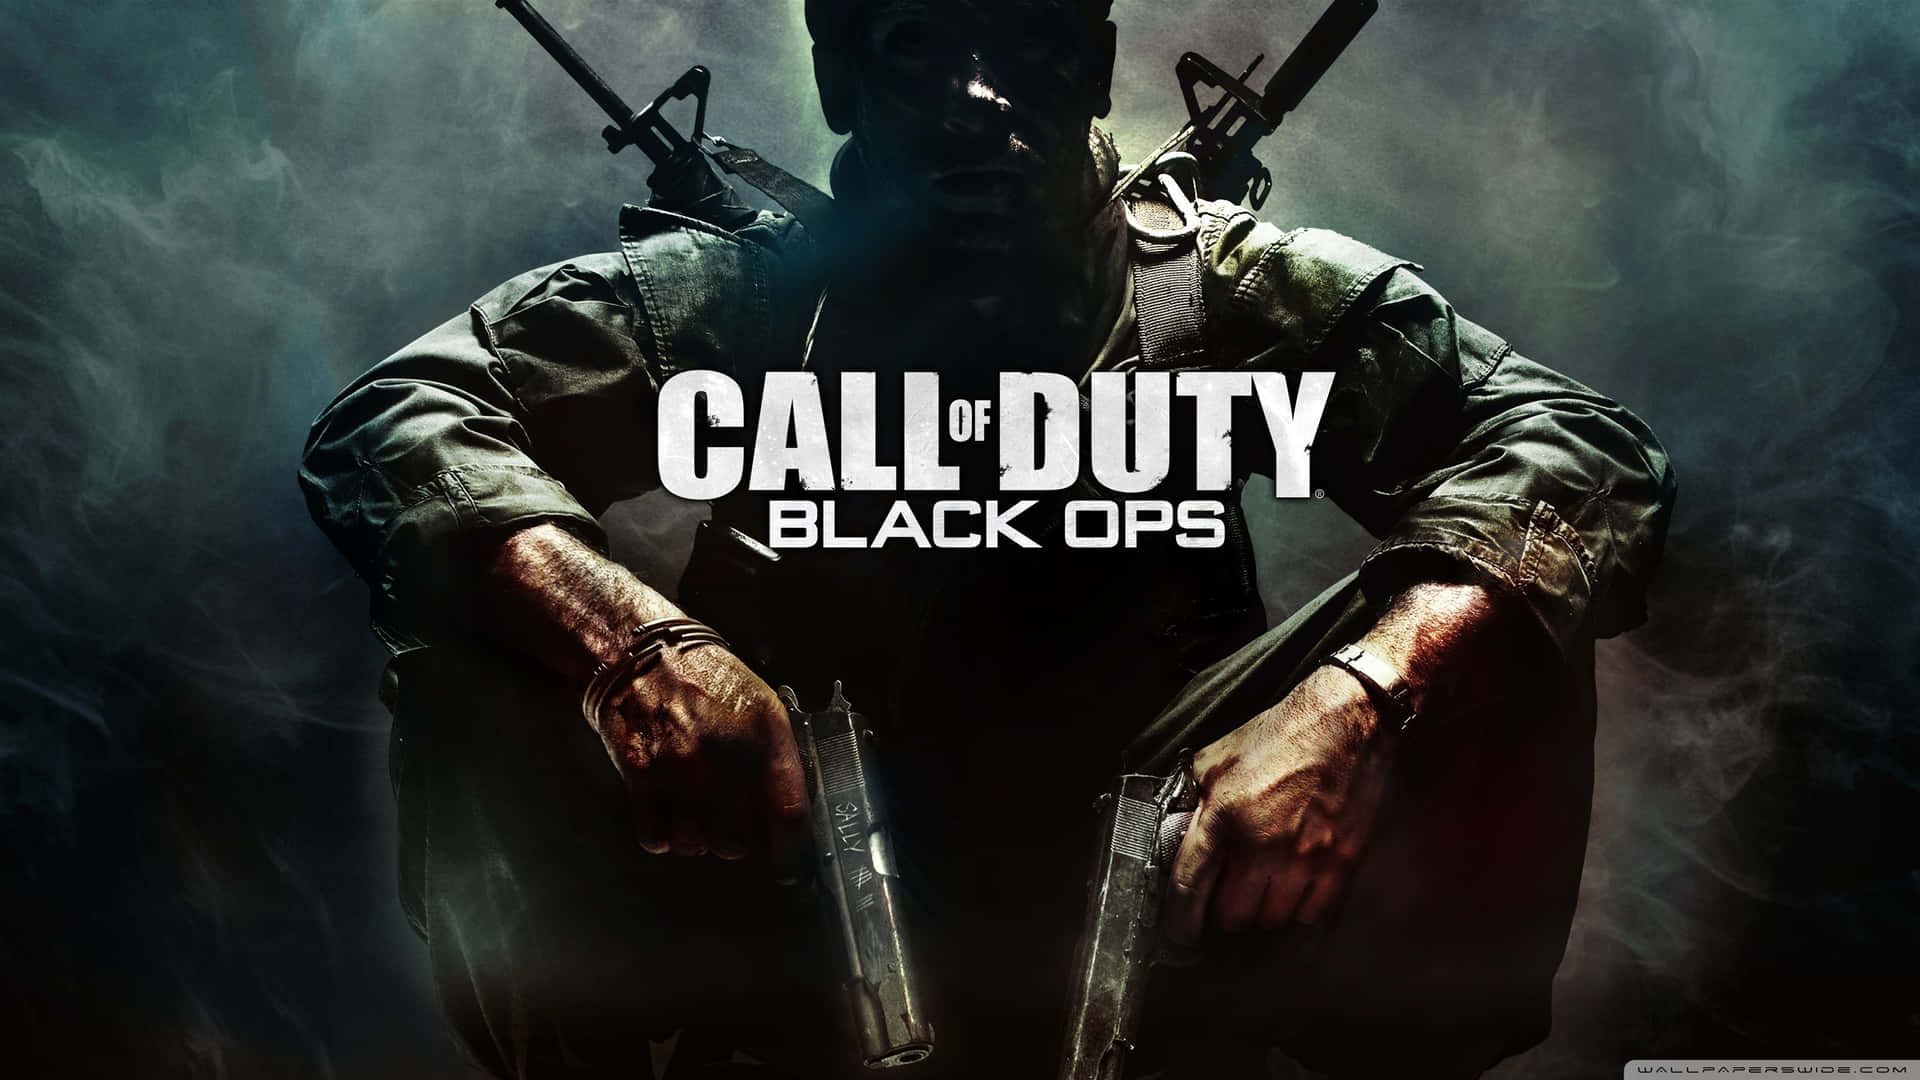 Prepare For Battle With Call of Duty: Black Ops 2 Wallpaper